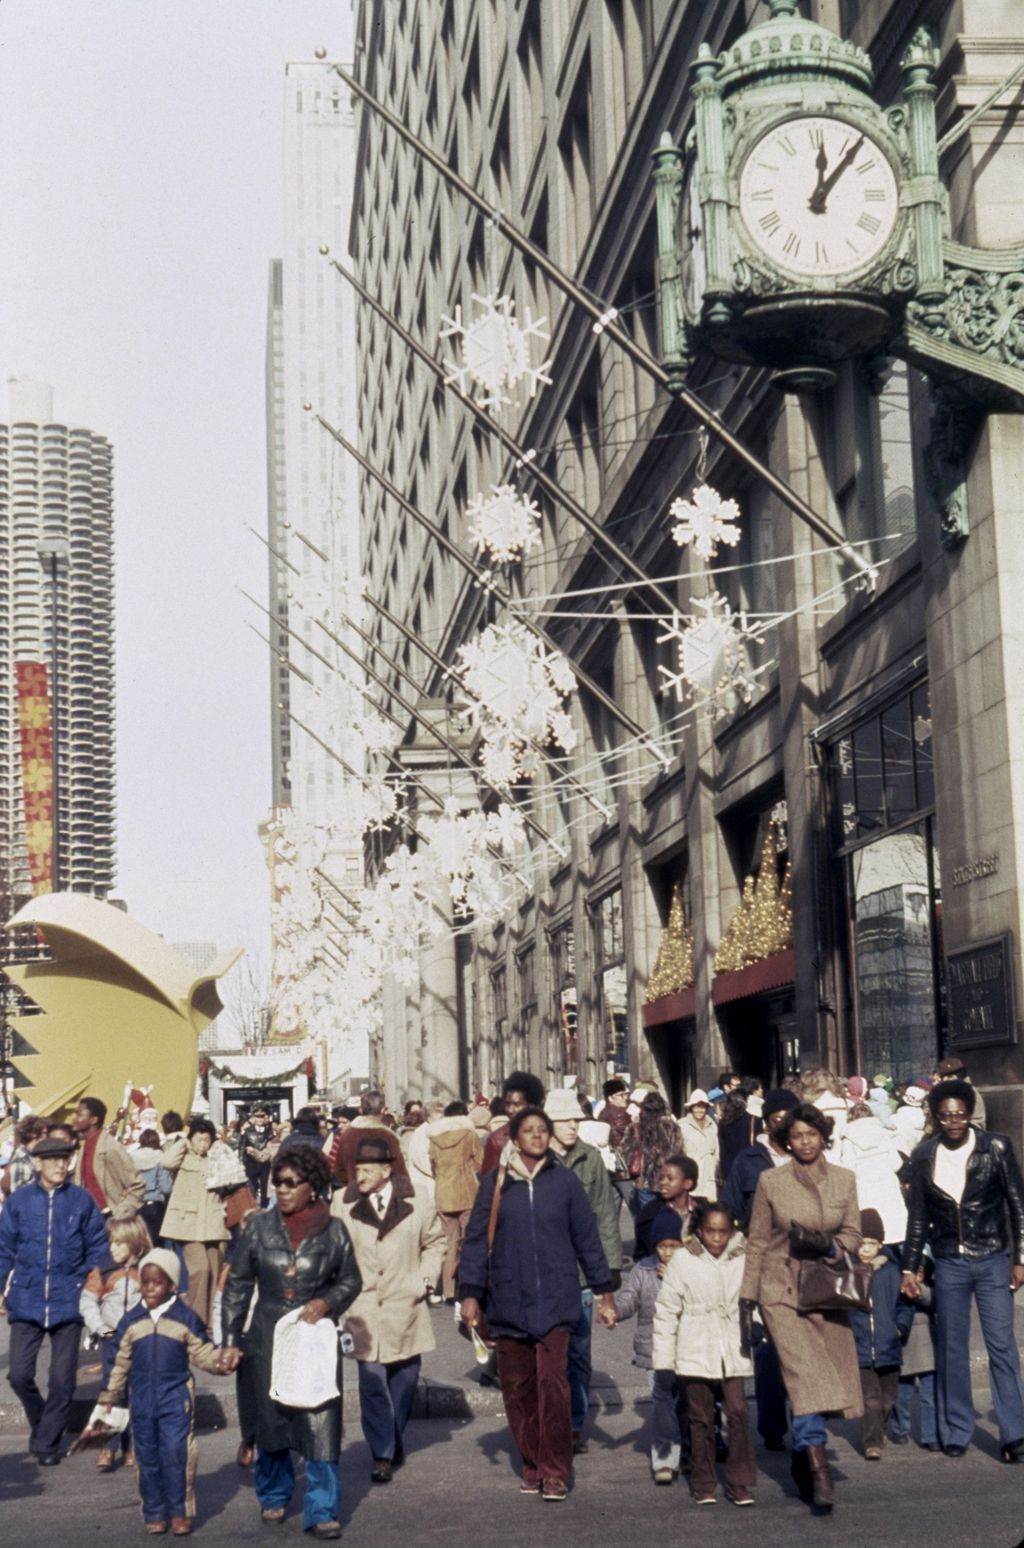 Pedestrians in front of Marshall Field's store